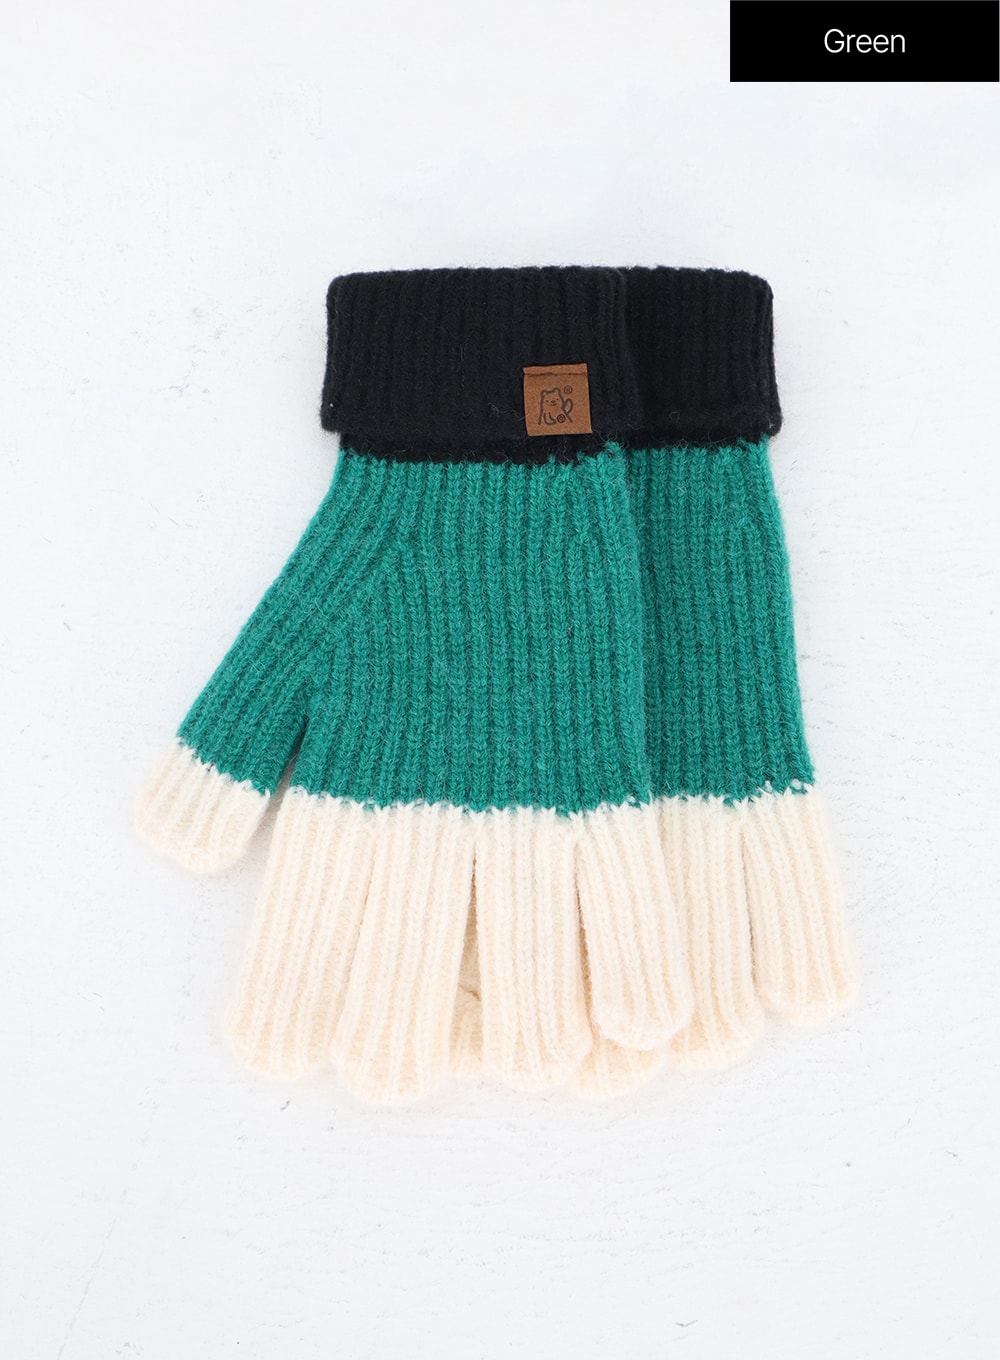 color-block-knit-gloves-in302 / Green